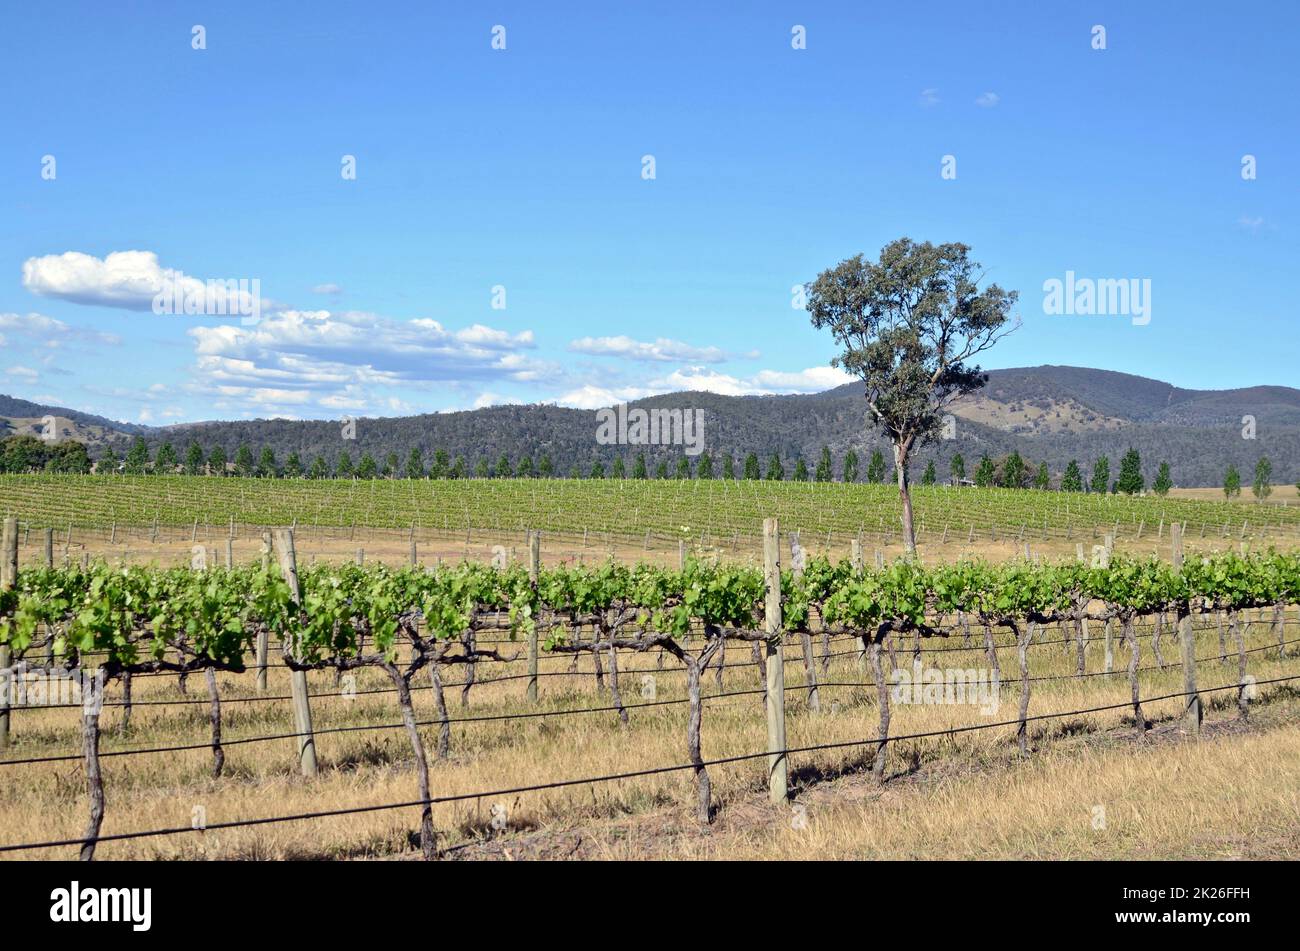 Grape vines growing near Mudgee in New South Wales, Australia Stock Photo